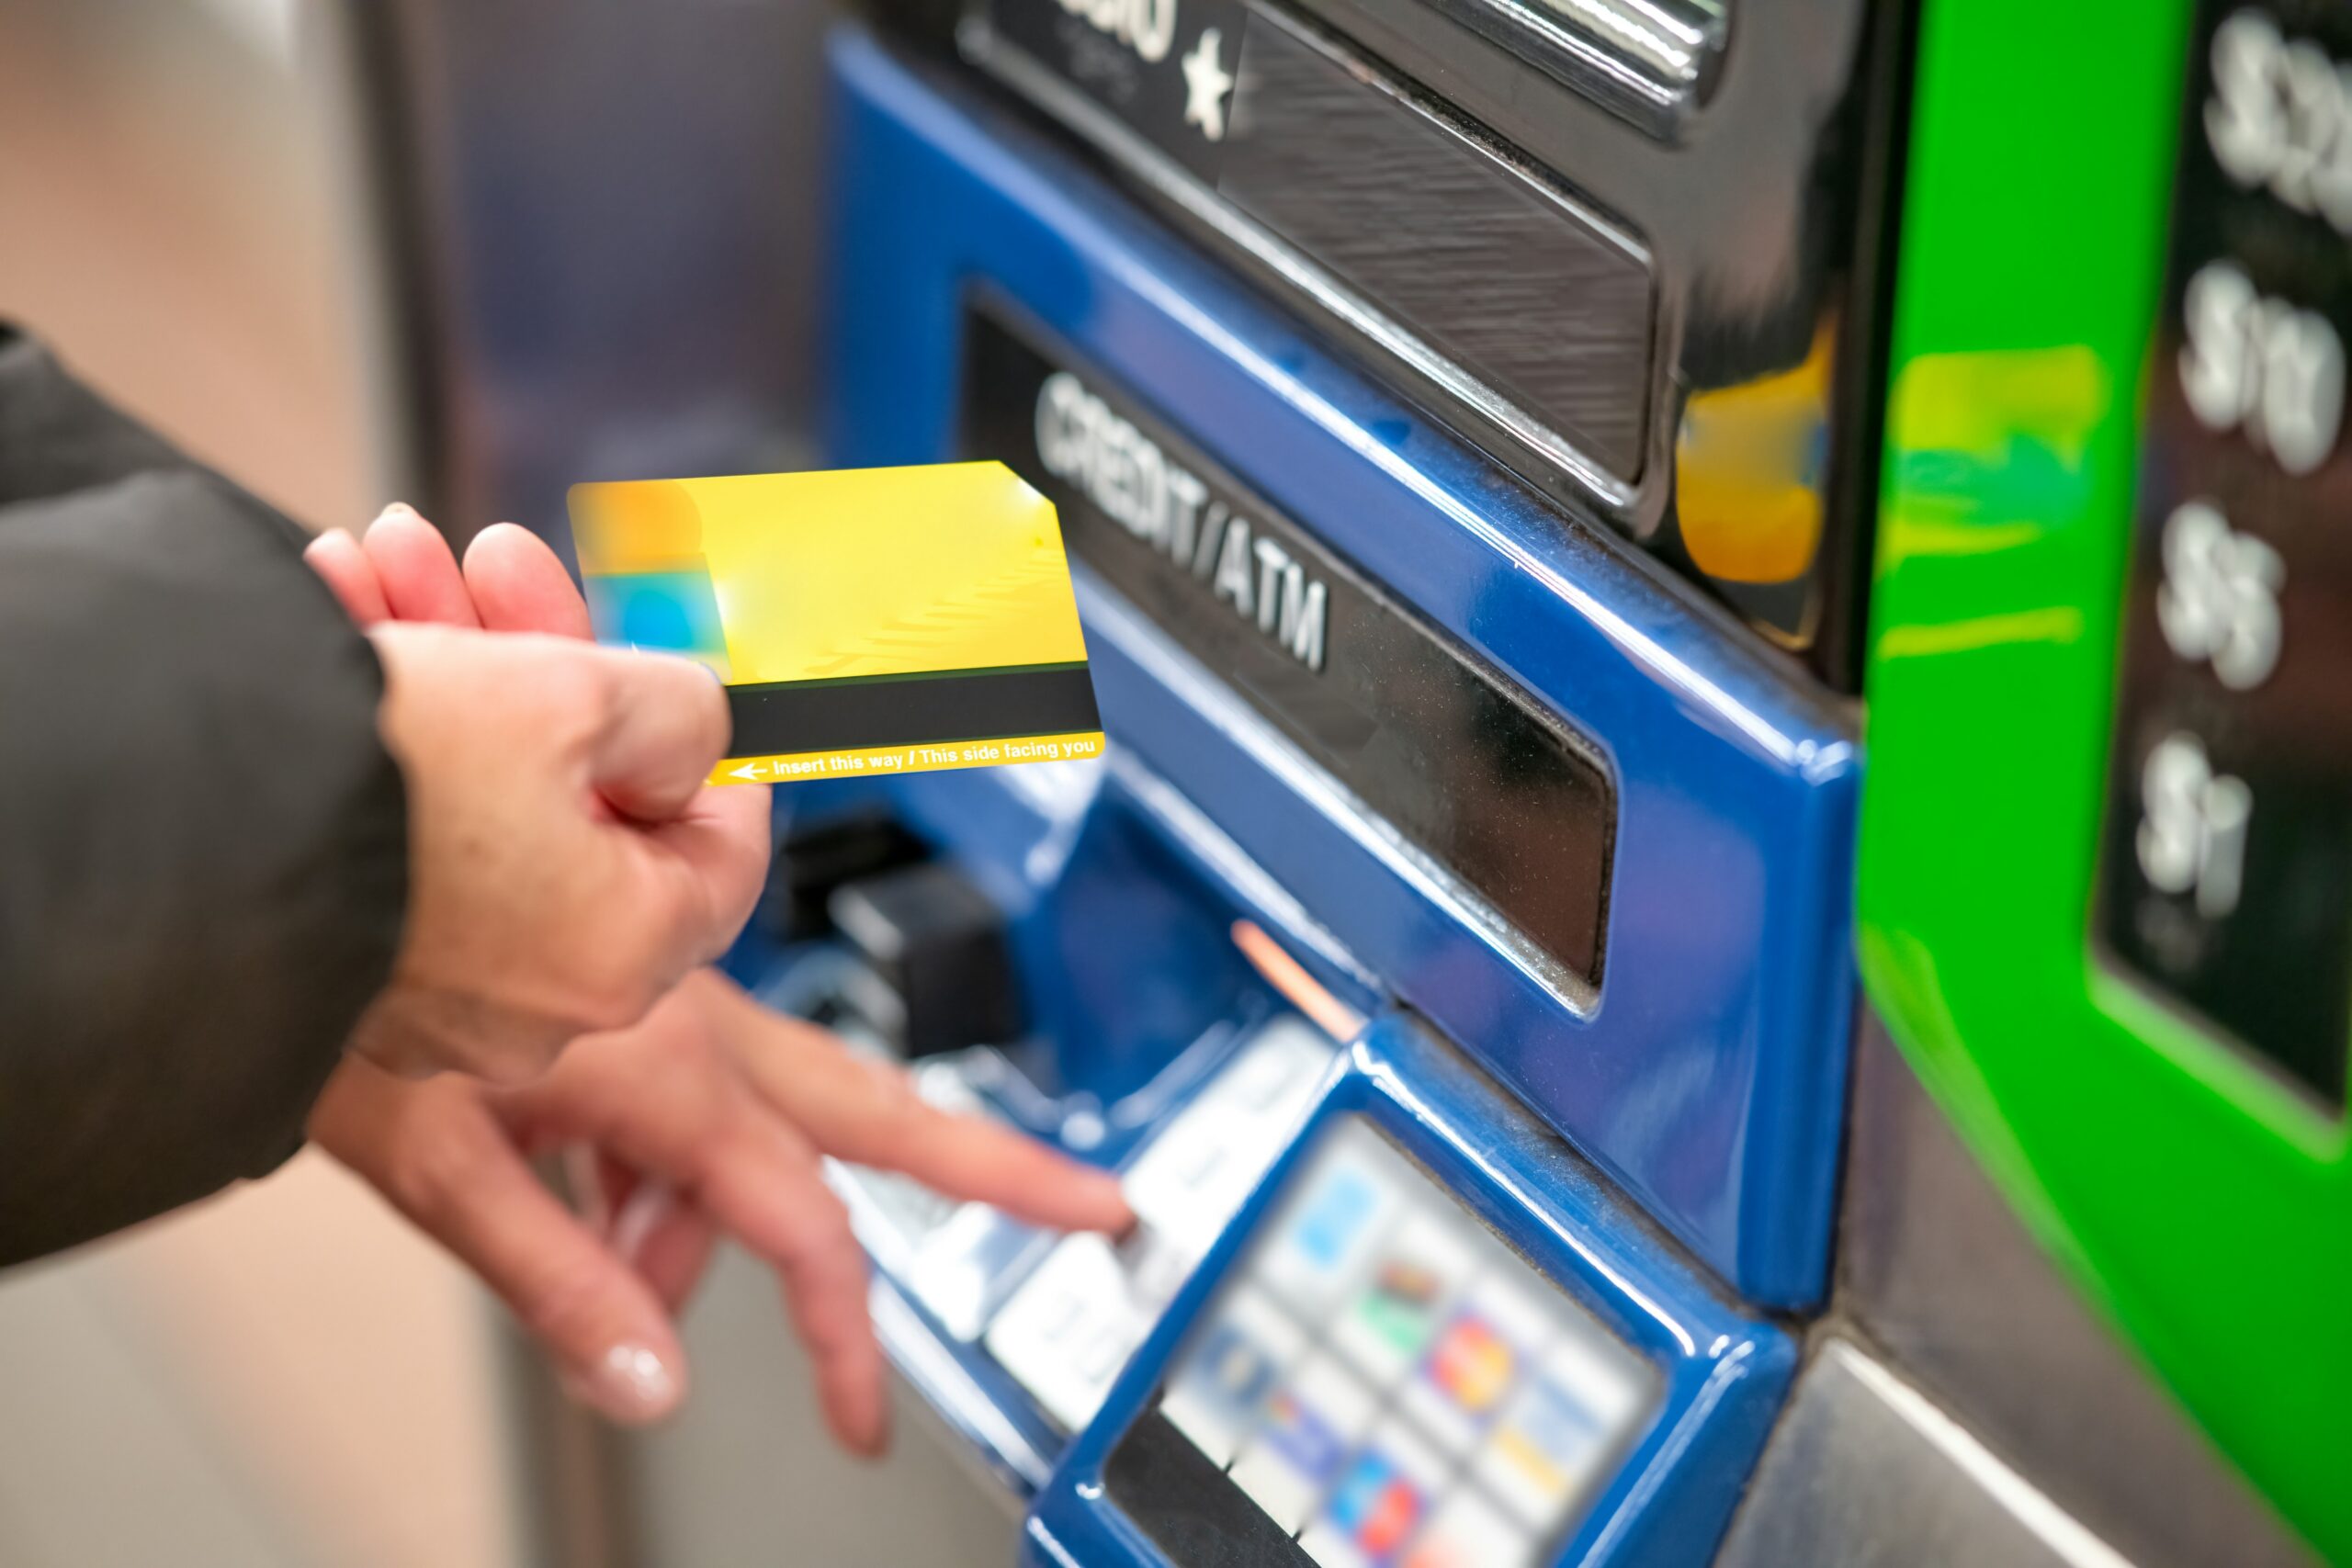 The Widespread Impact of Digitalization in Indonesia Leads to a Decline in ATM Transactions